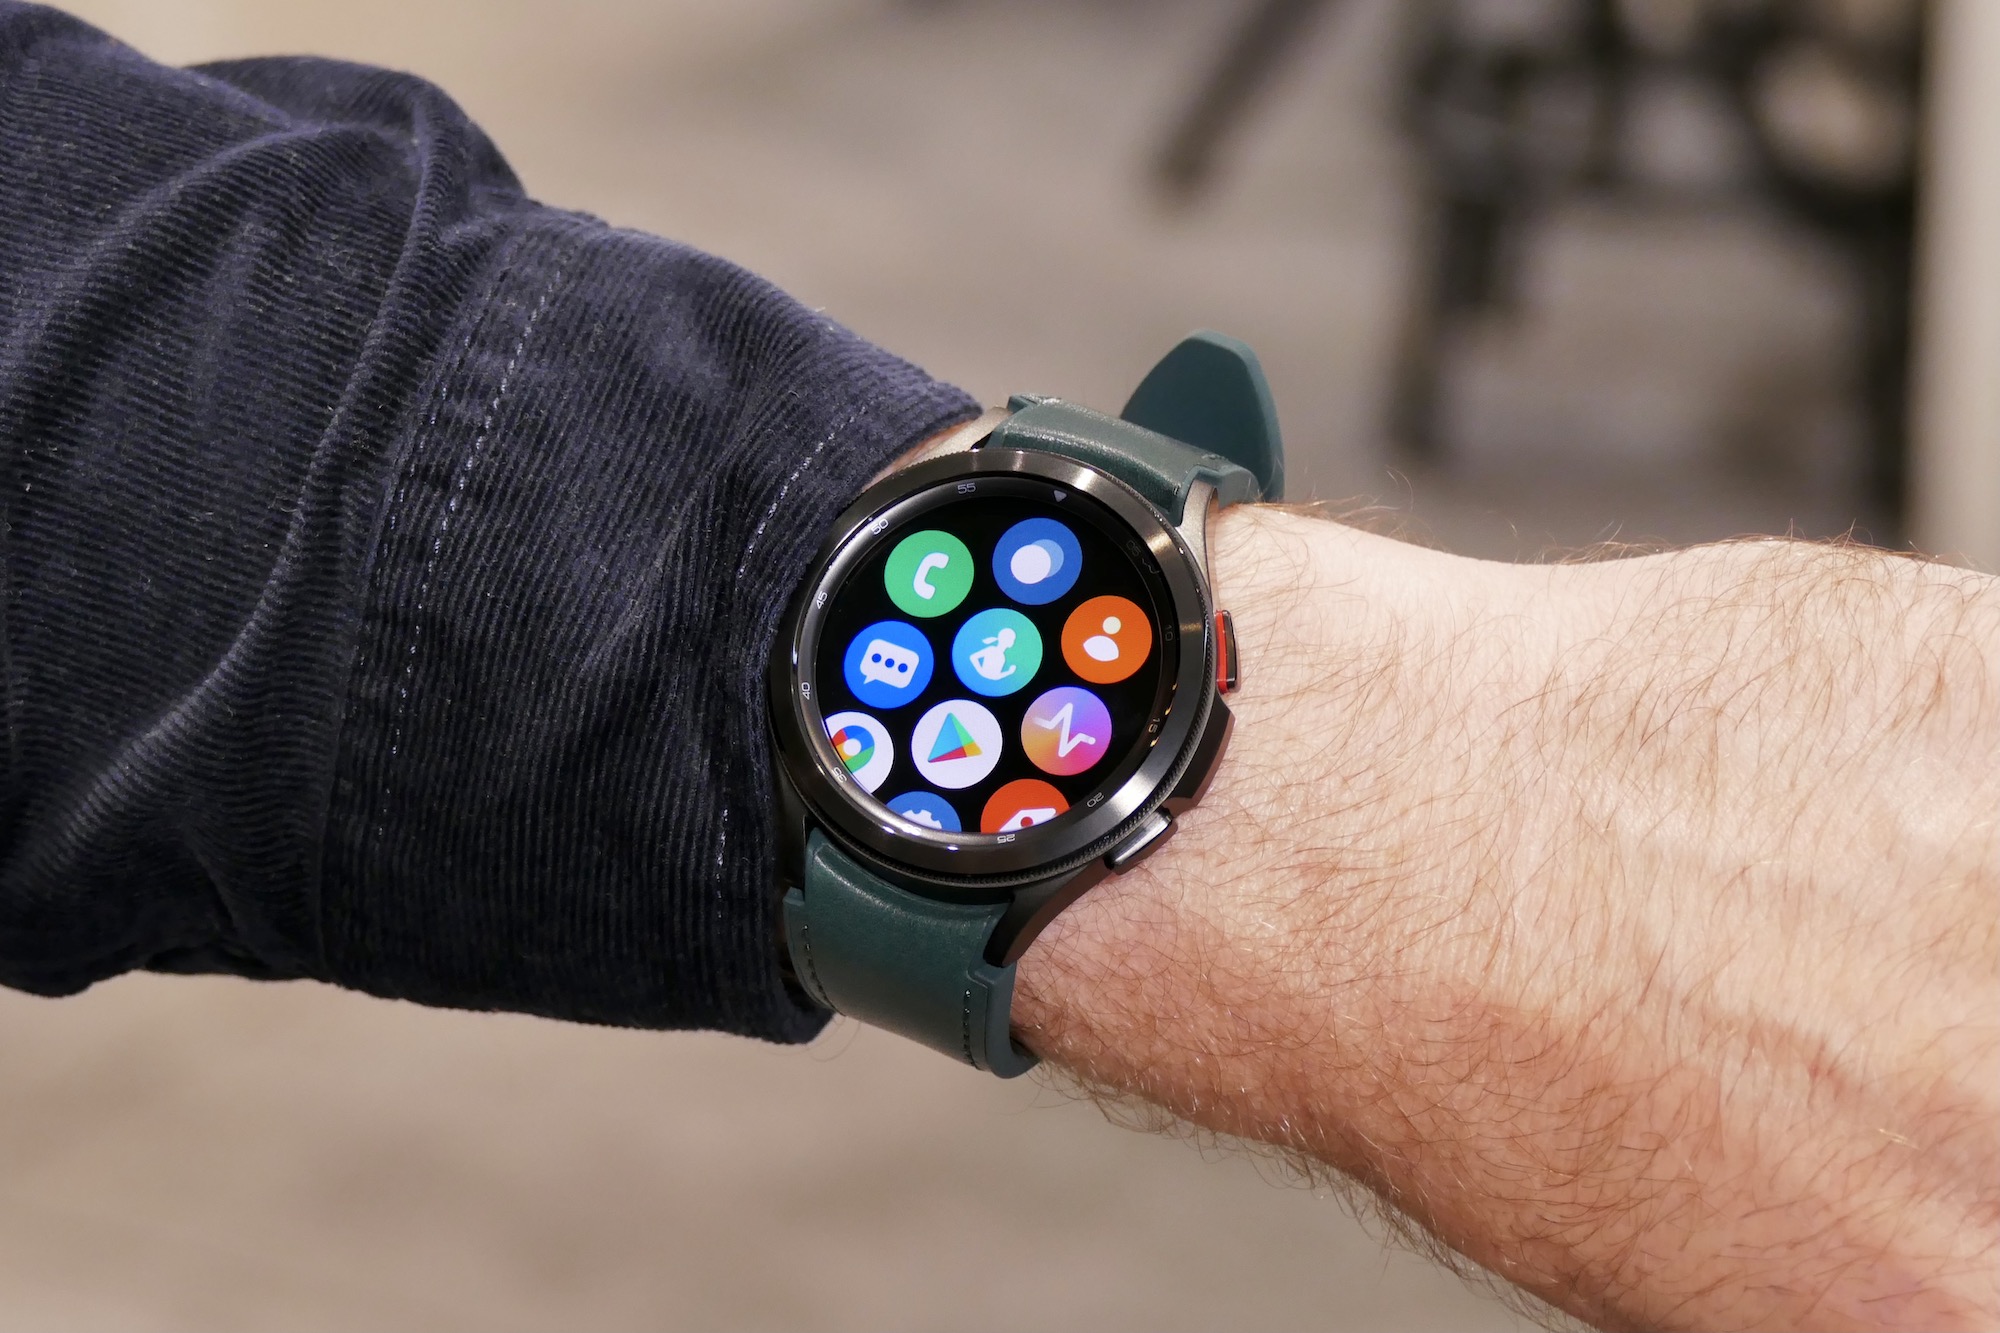 Samsung Galaxy Watch 4 Hands-on Review: Your Choice of Style | Digital Trends